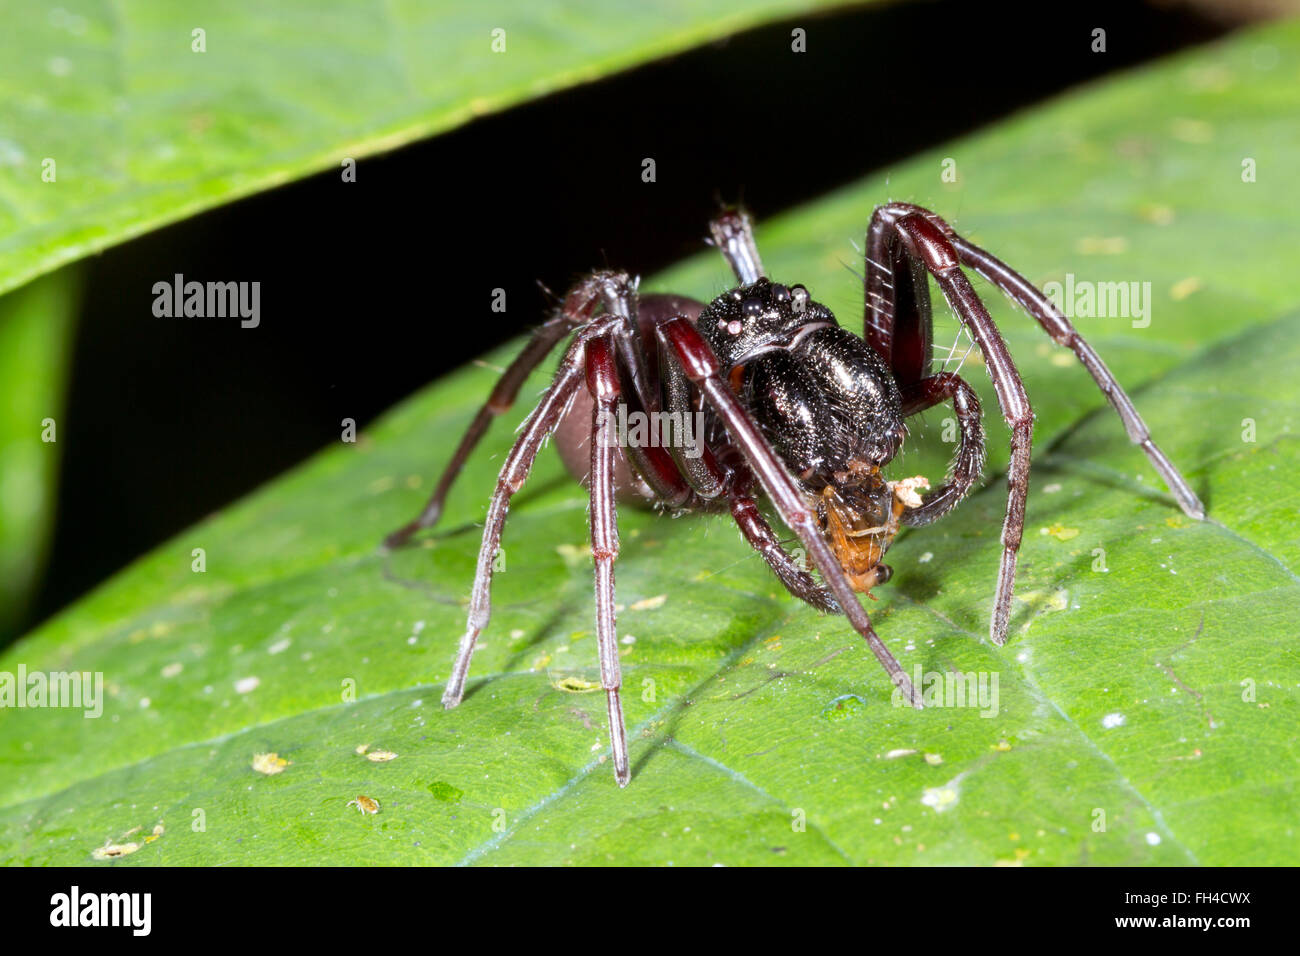 Corrinnid sac spider (Family Corrinnidae) eating an ant in the rainforest, Pastaza province, Ecuador Stock Photo